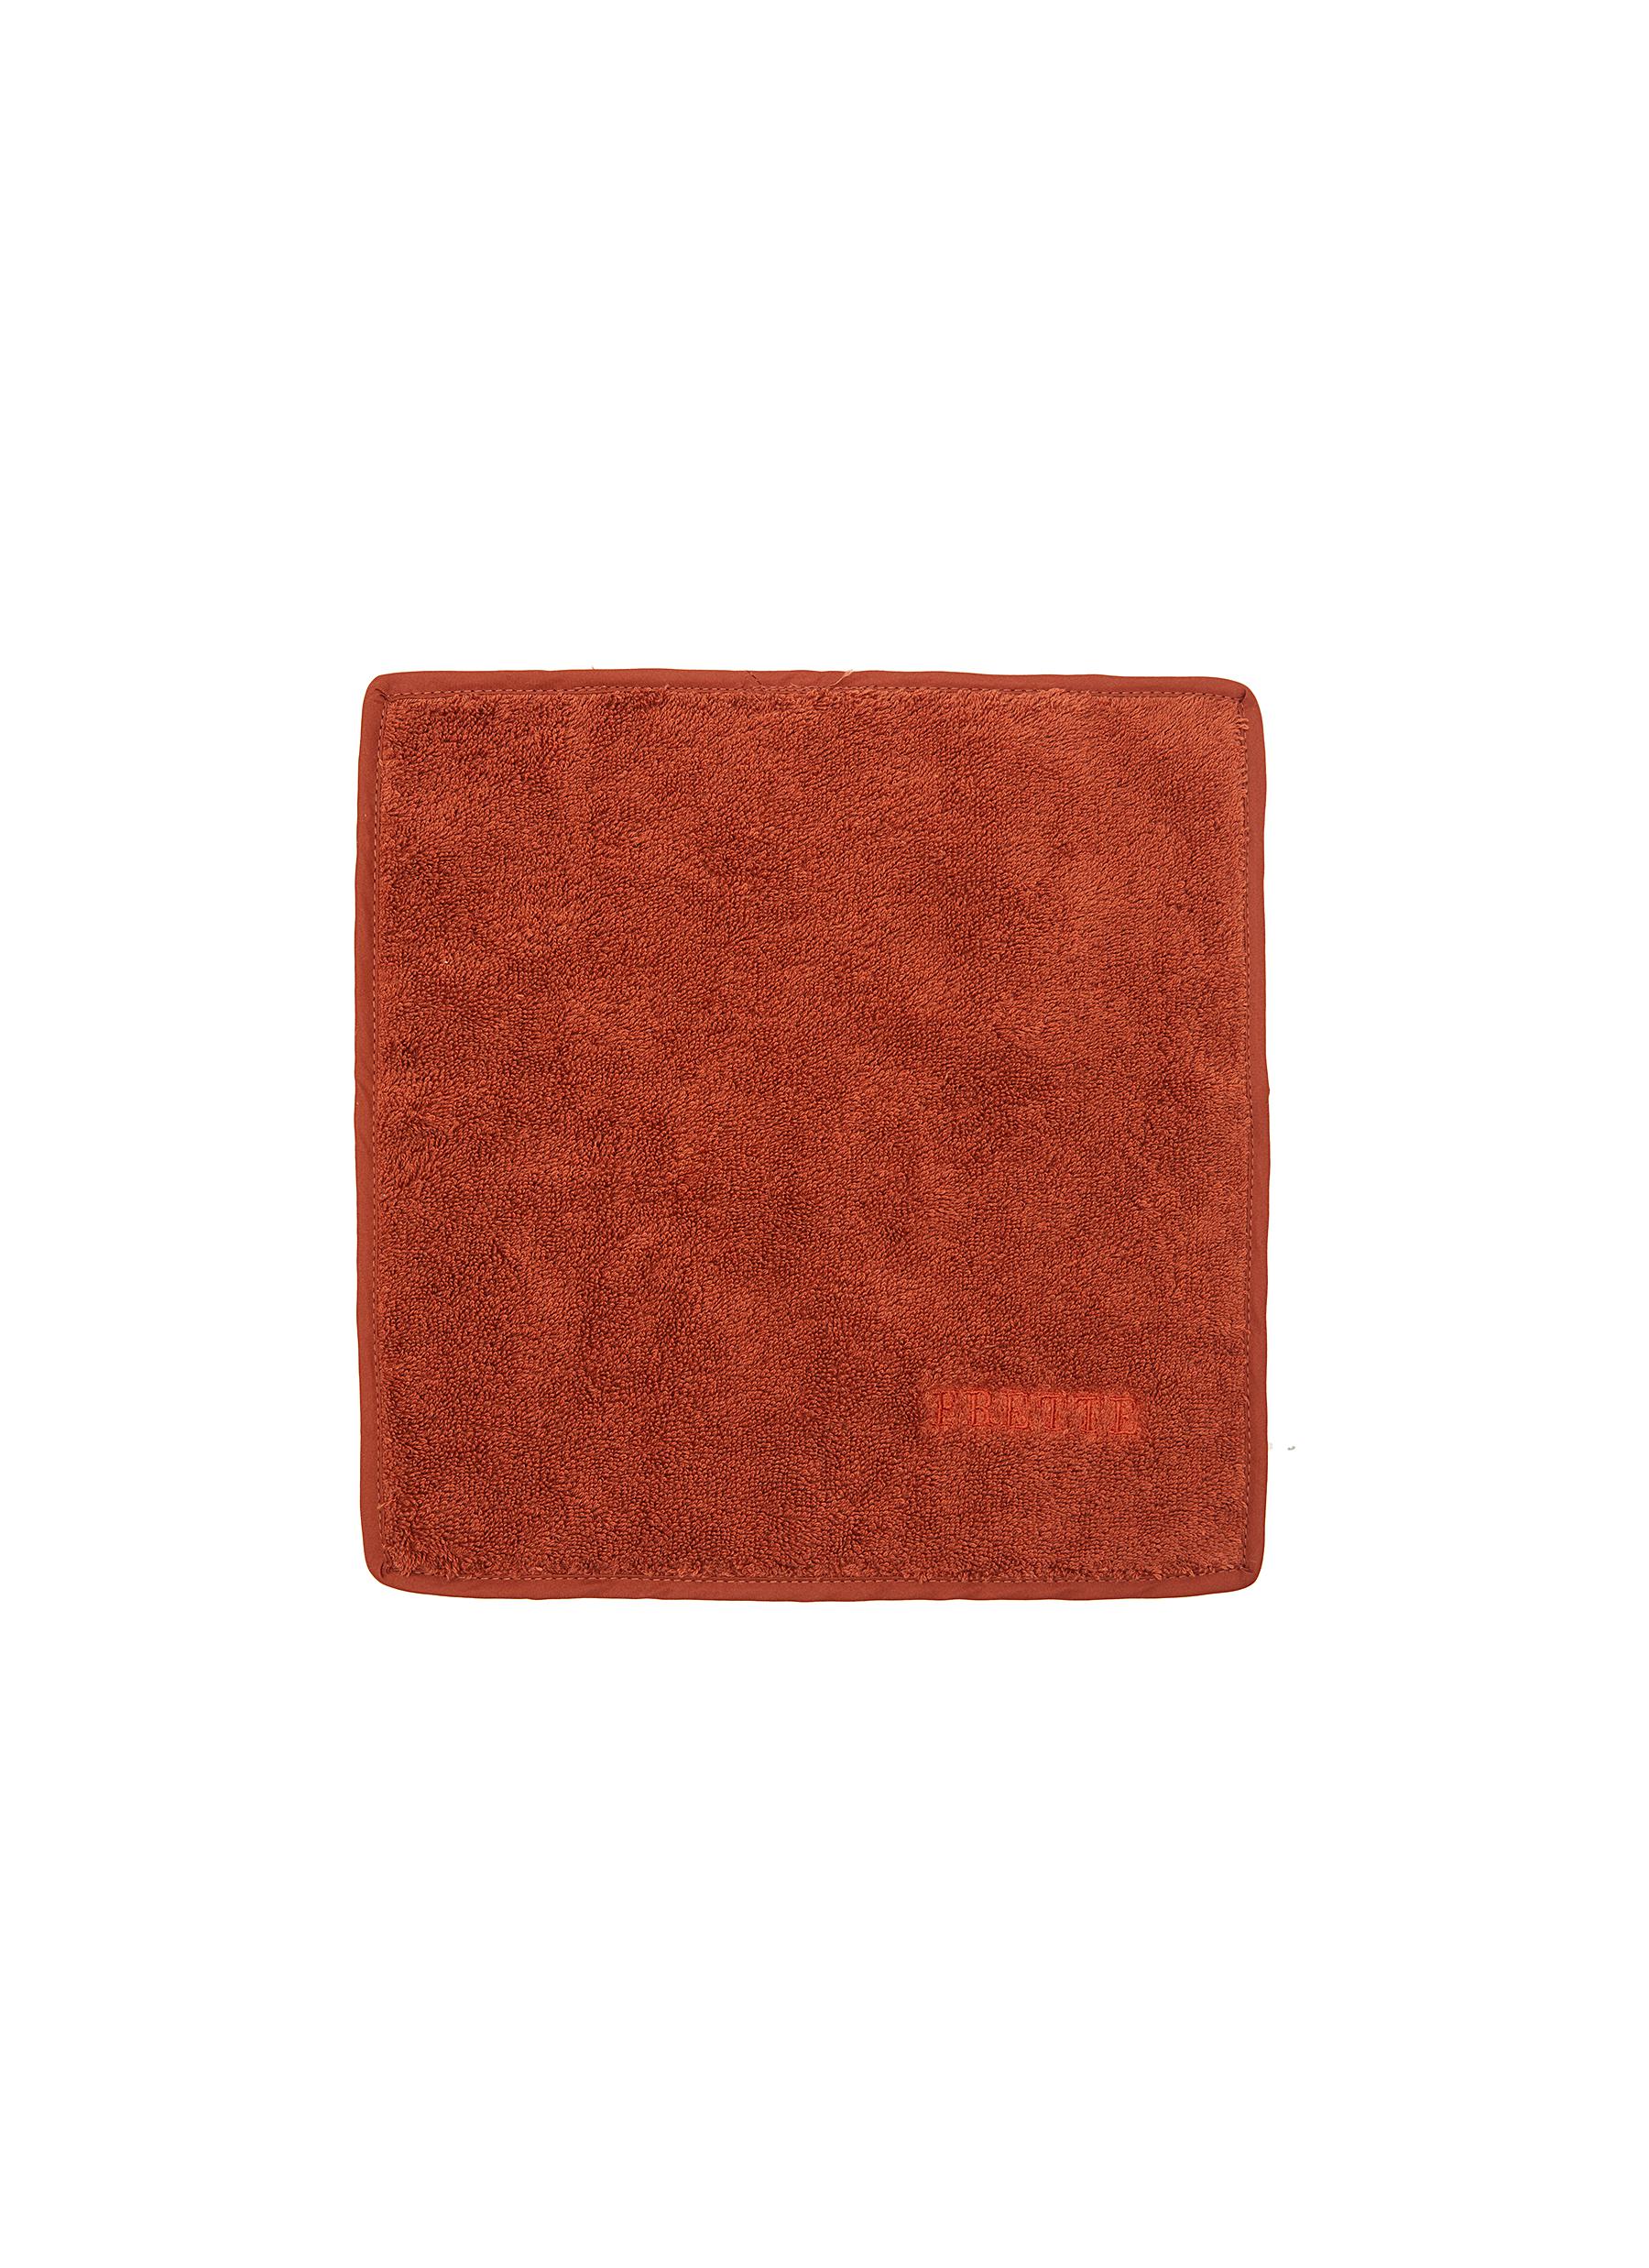 Unito Wash Towel - Sunset Red